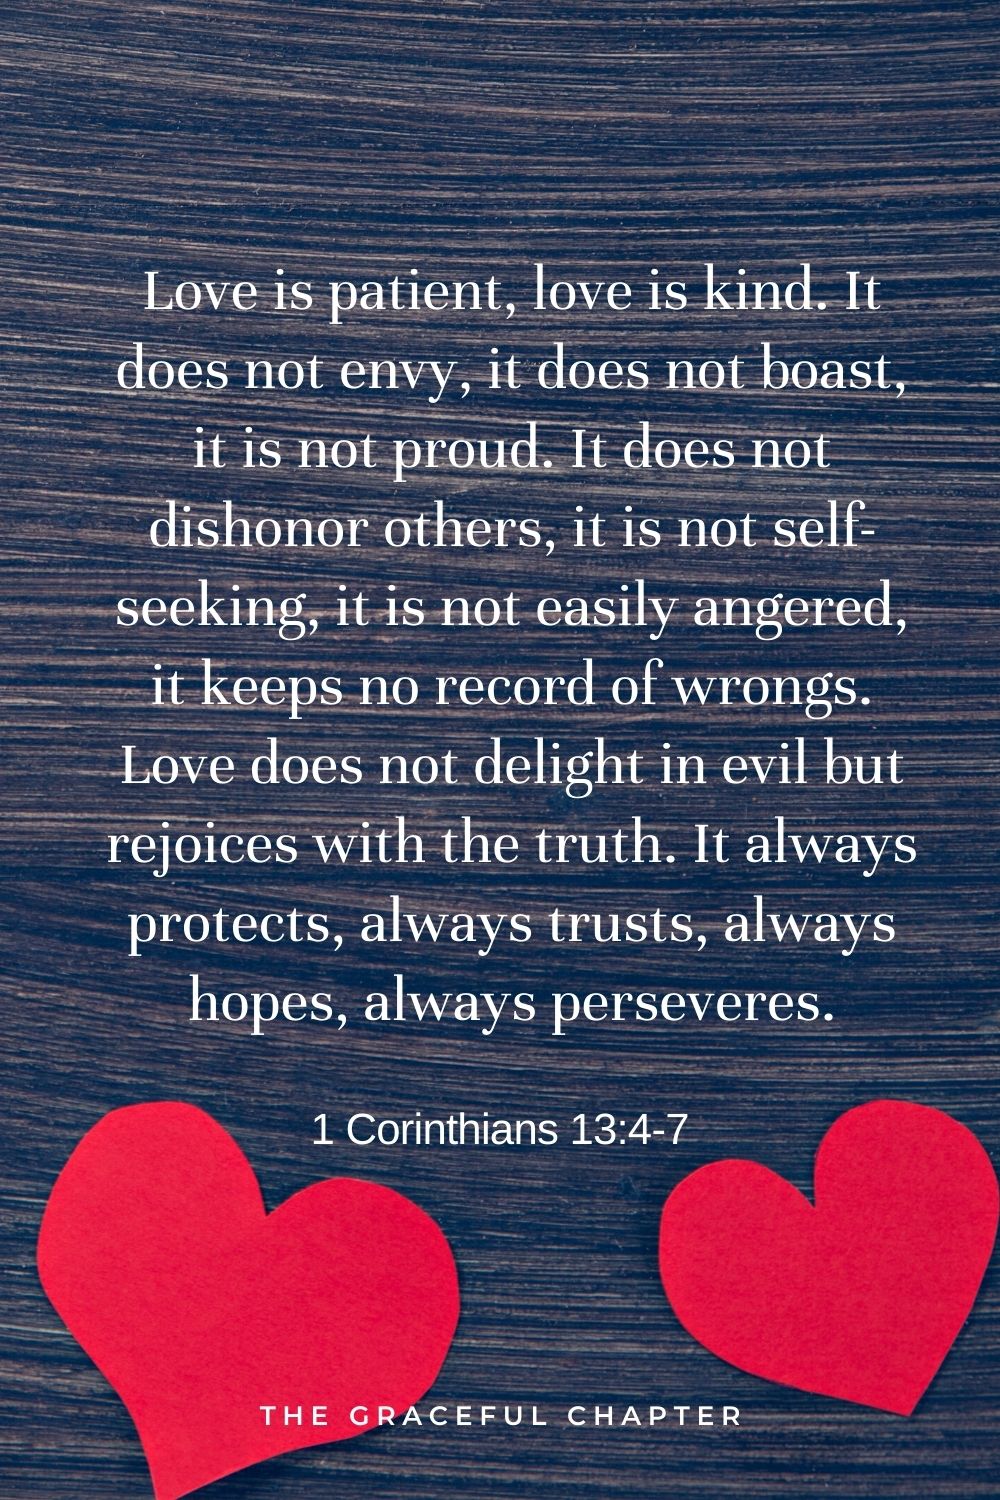 Love is patient, love is kind. It does not envy, it does not boast, it is not proud. It does not dishonor others, it is not self-seeking, it is not easily angered, it keeps no record of wrongs. Love does not delight in evil but rejoices with the truth. It always protects, always trusts, always hopes, always perseveres. 1 Corinthians 13:4-7